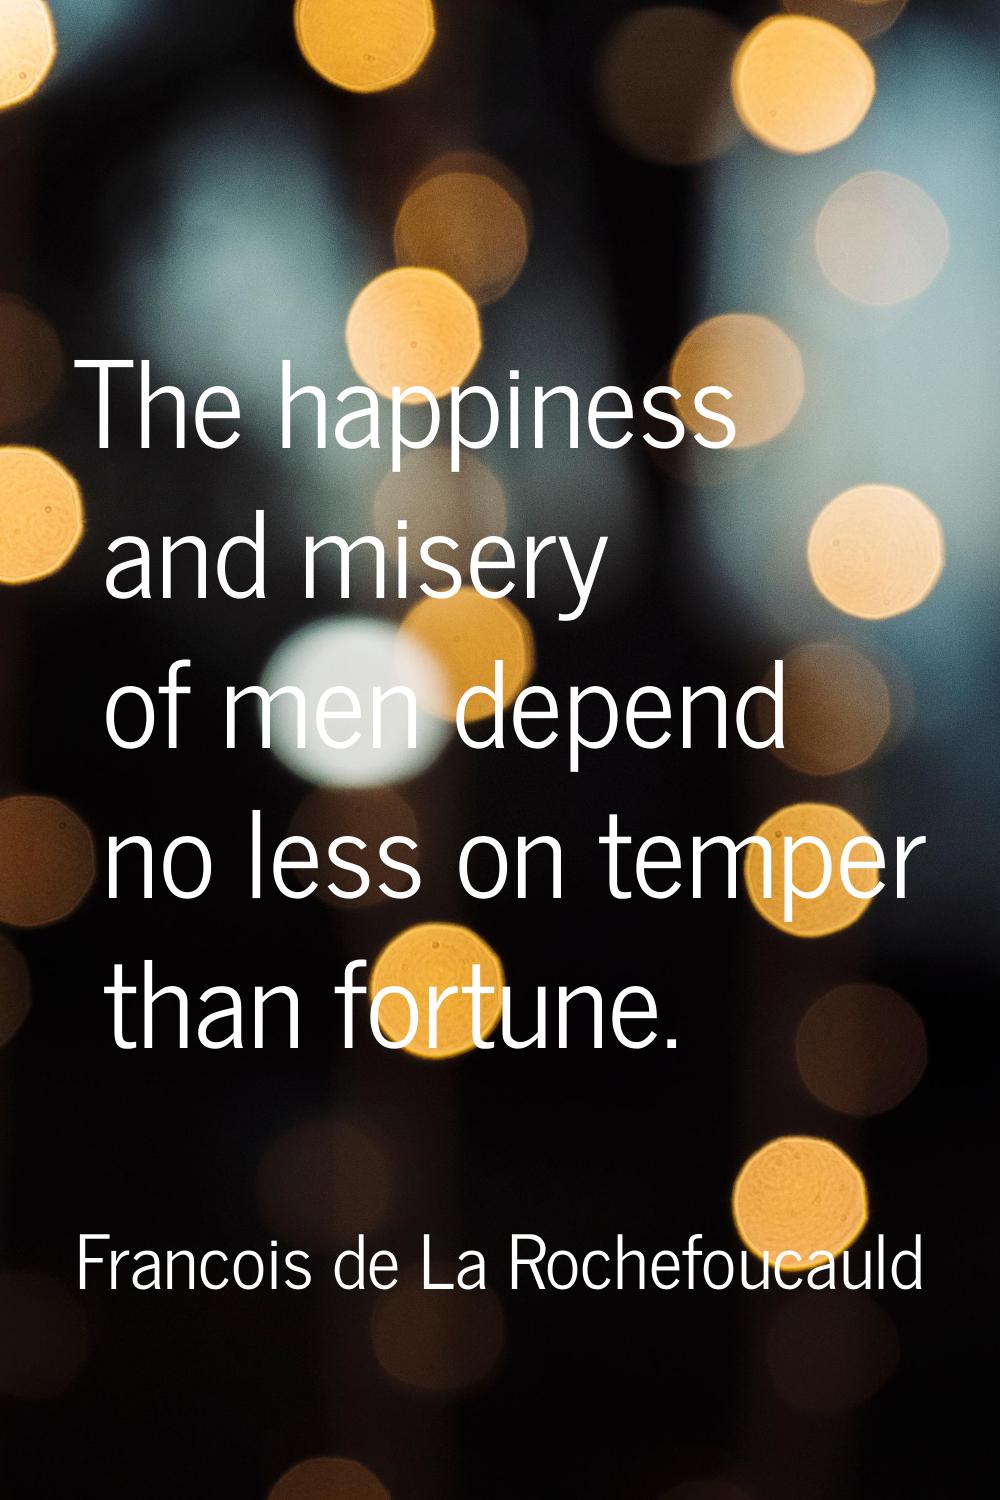 The happiness and misery of men depend no less on temper than fortune.